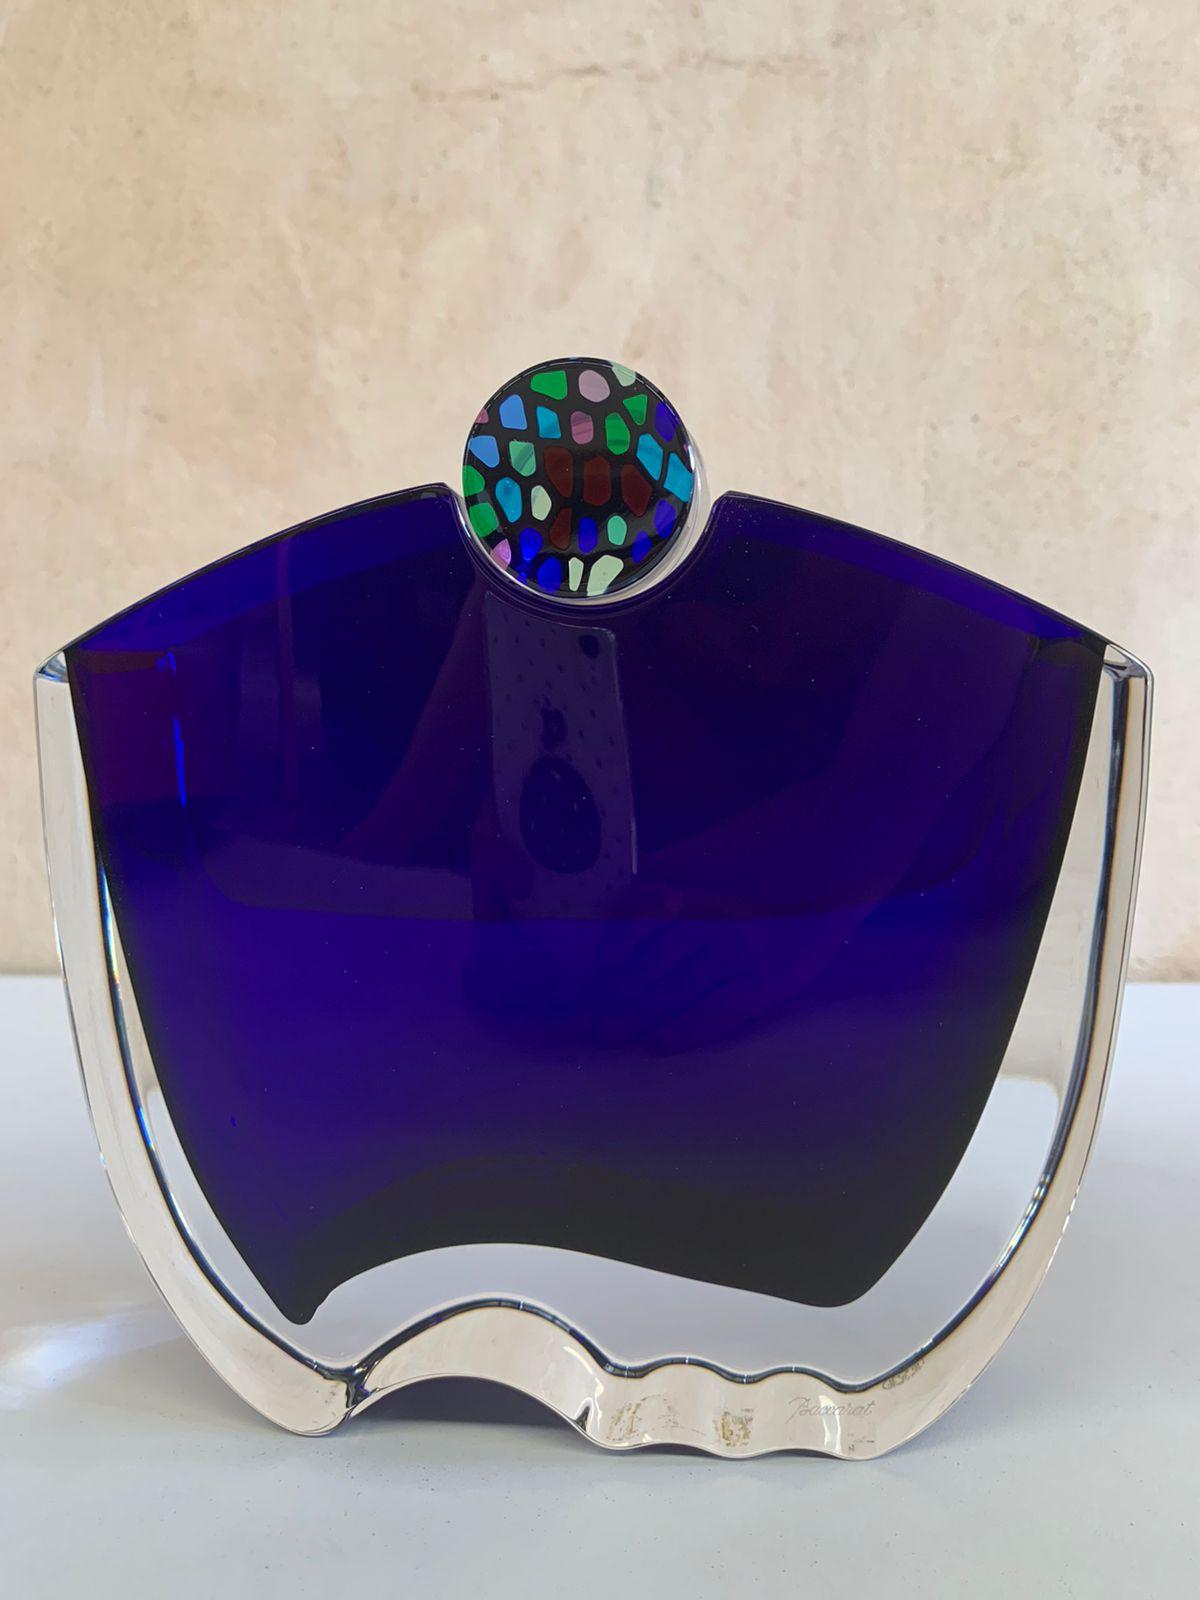 Thomas Bastide for Baccarat.
Crystal vase with coloured crystal.
Perfect condition, signed. With original Baccarat box.